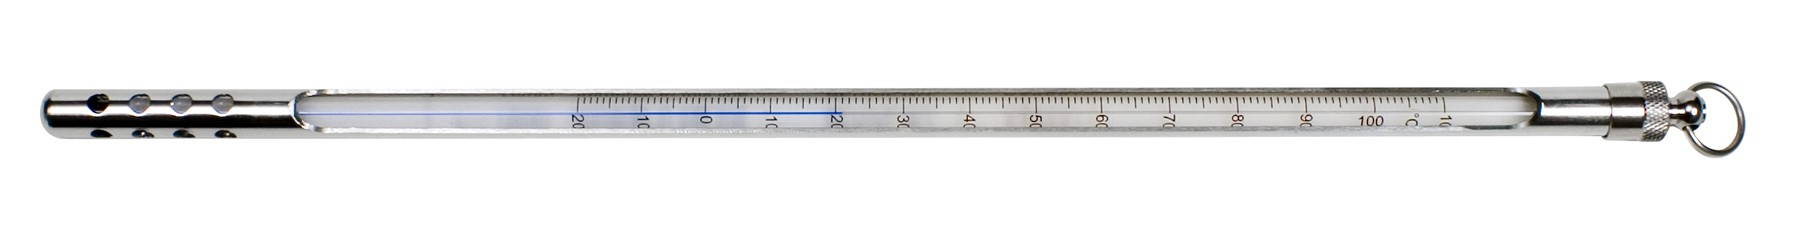 H-B DURAC Plus Armored Liquid-In-Glass Thermometer; -35 to 50C, 76mm Immersion, Organic Liquid Fill